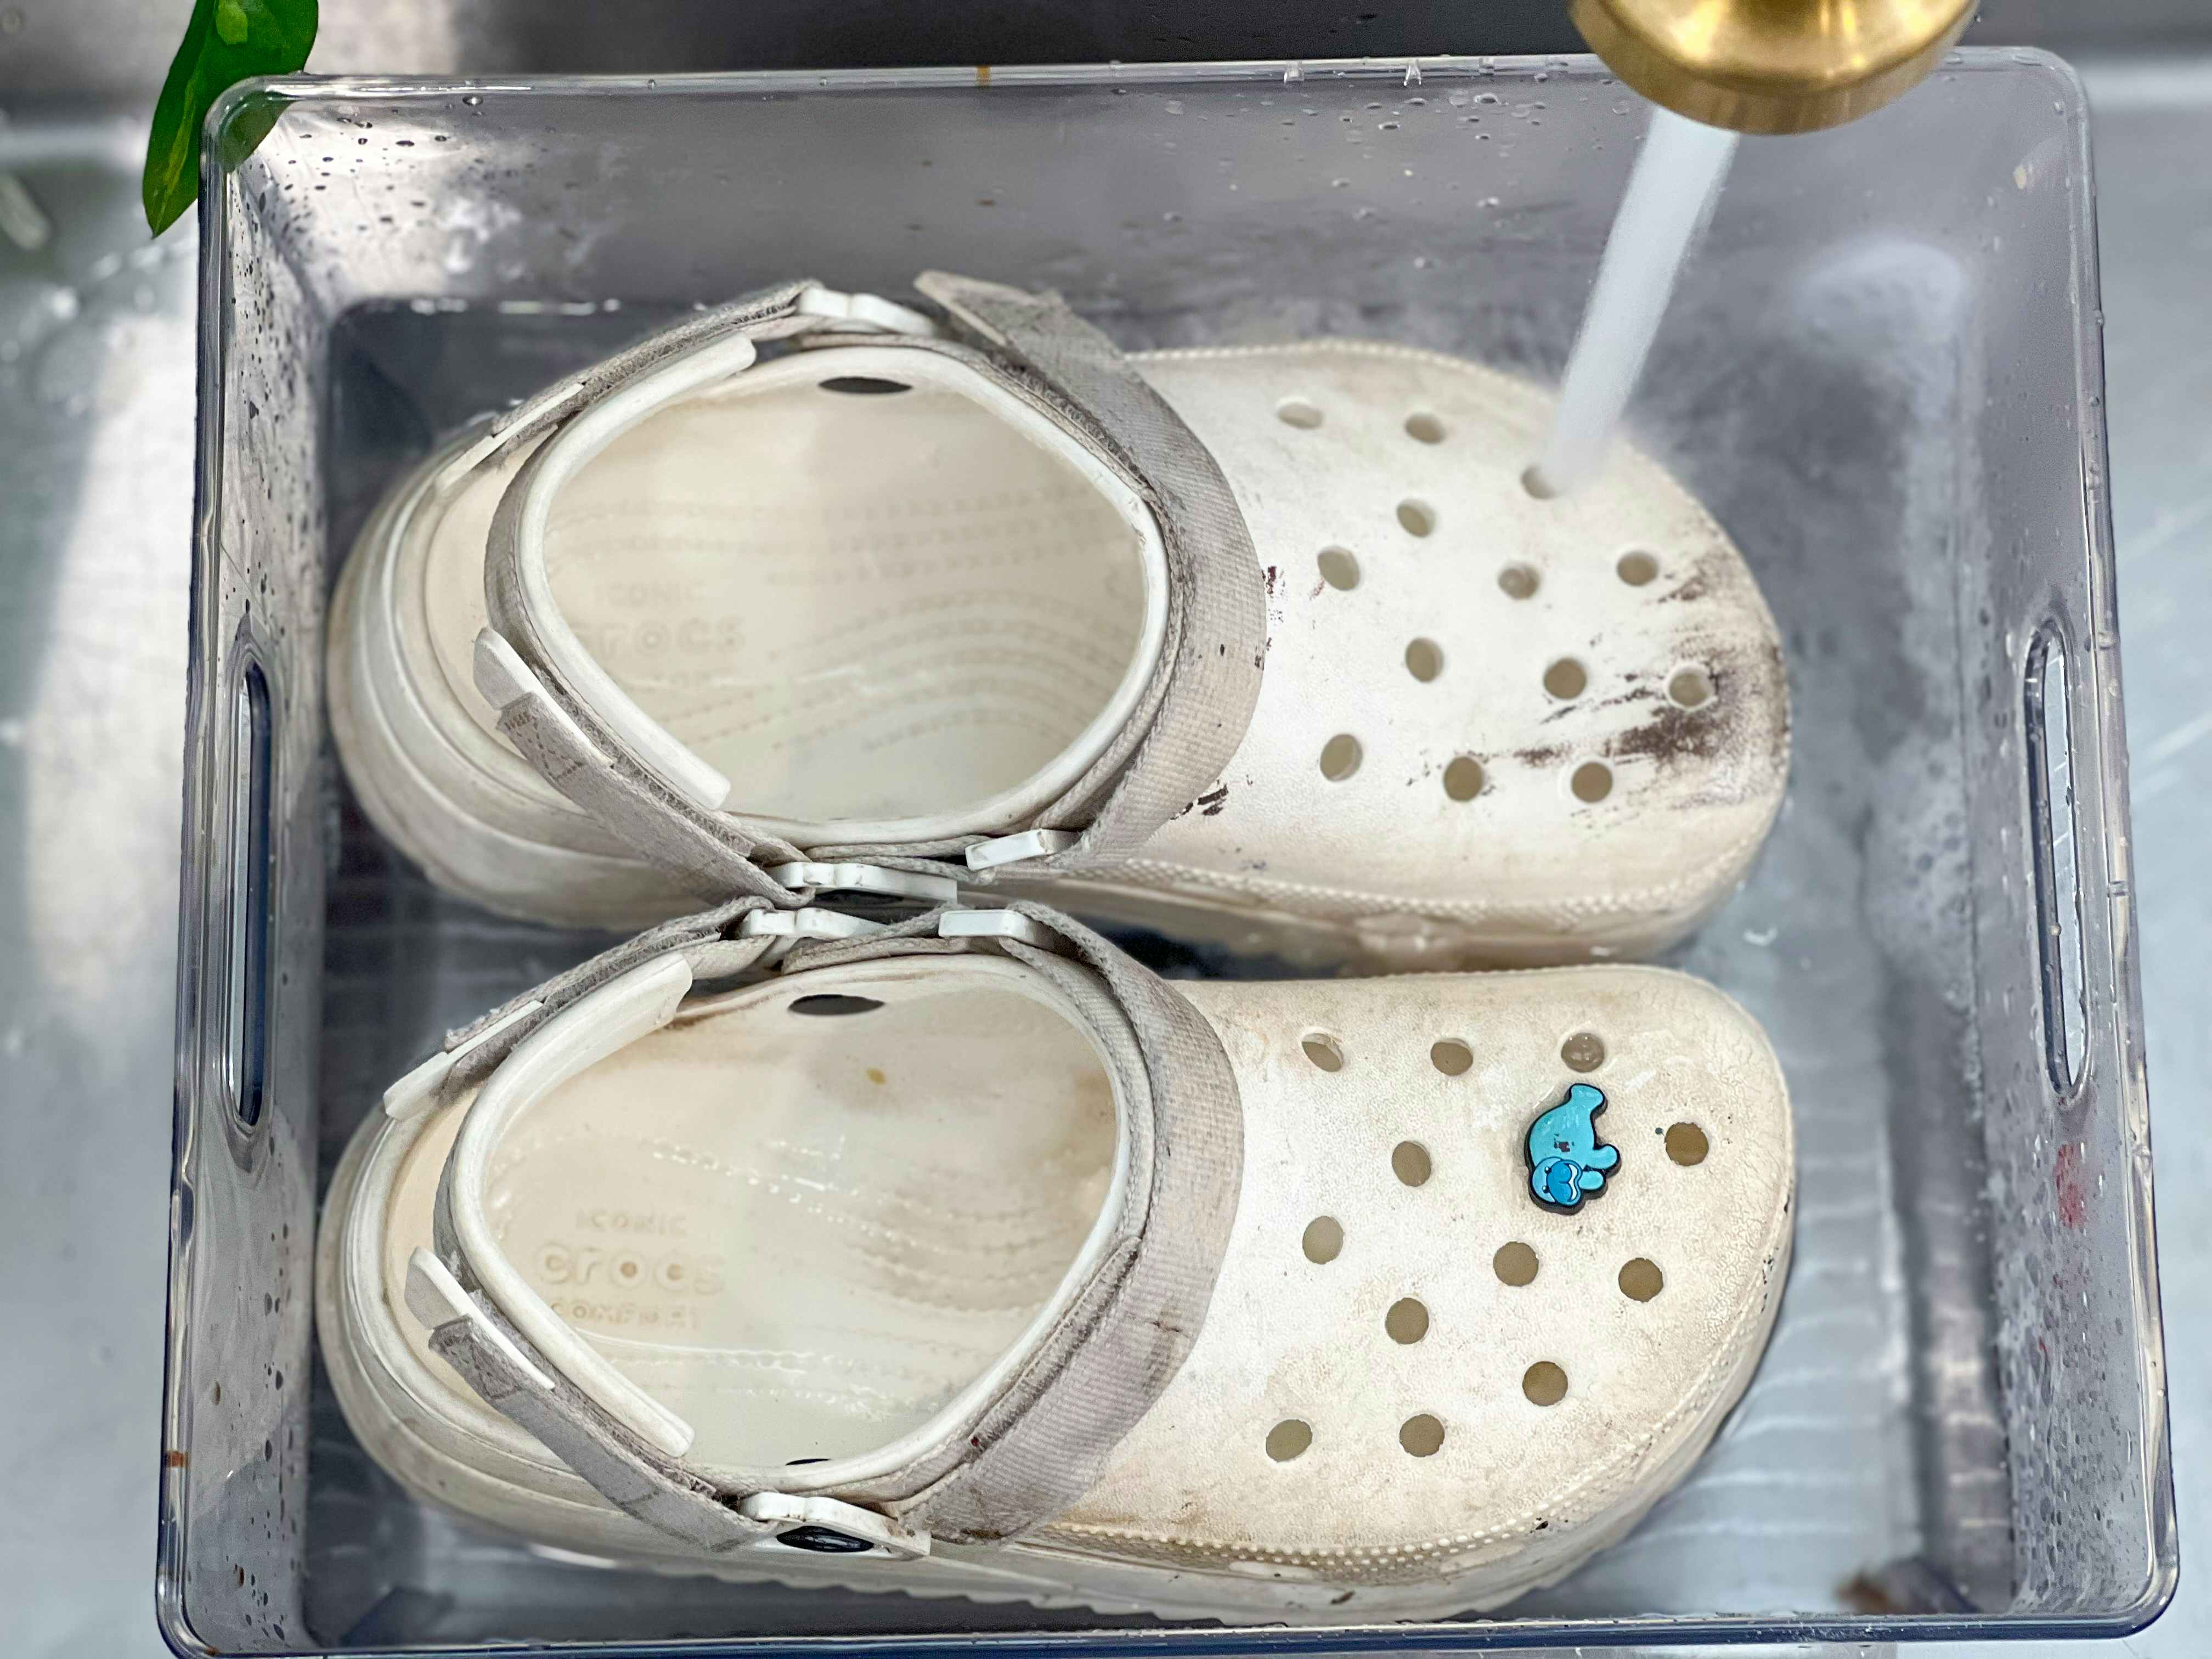 A pair of dirty Crocs in a plastic tub with water running over them.